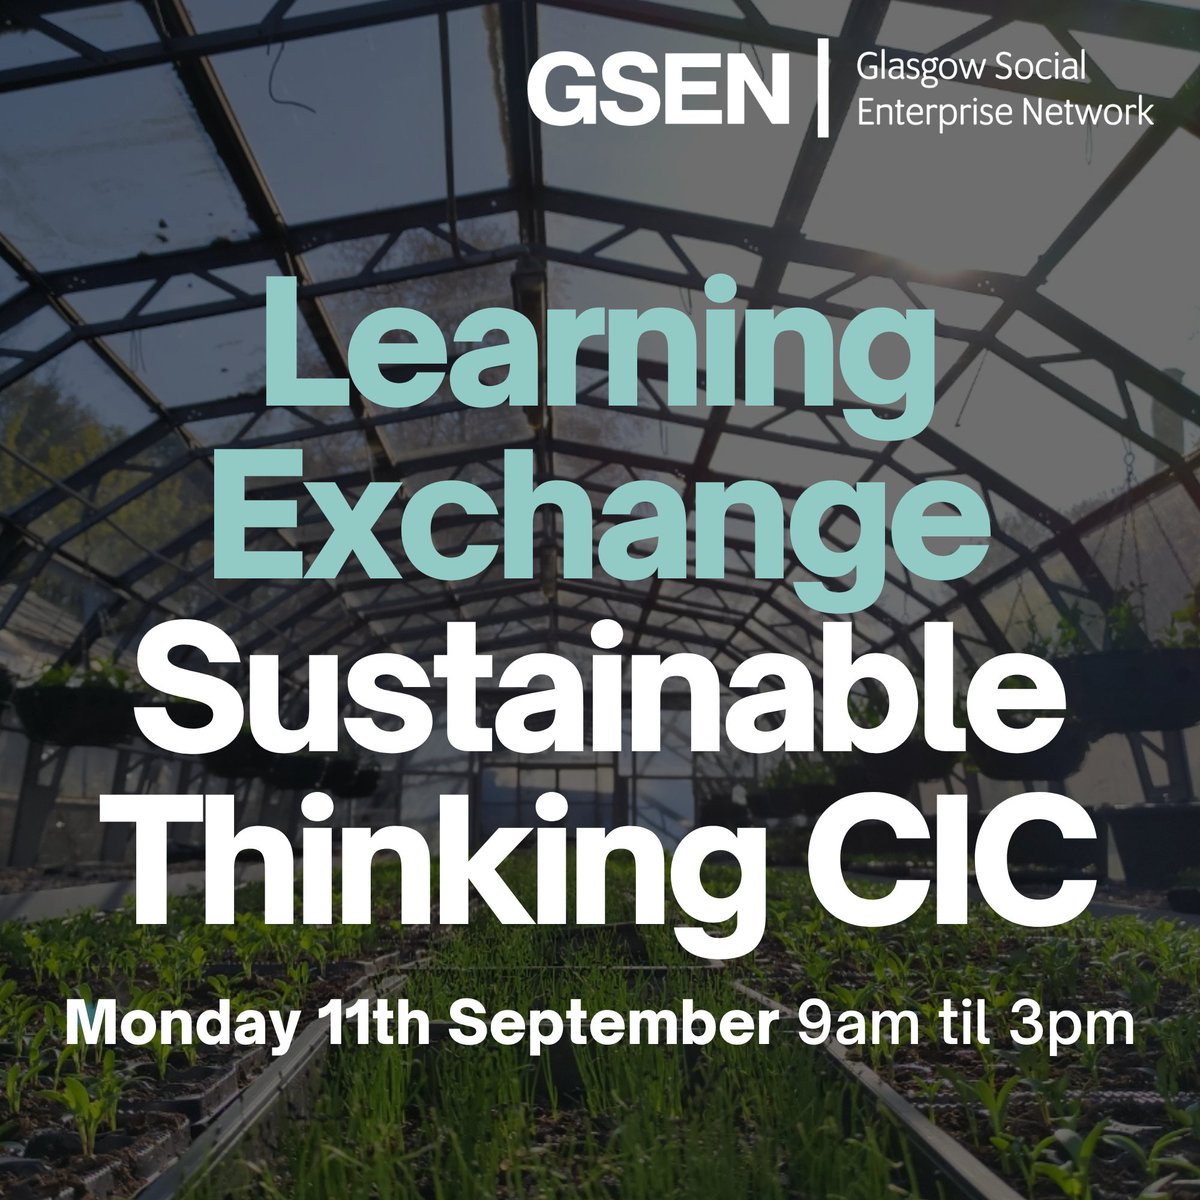 Wondering how you can make your community garden financially sustainable? We still have a few spaces left on our fully-funded visit to the social enterprise, Sustainable Thinking Scotland C.I.C, on Monday. If you'd like to find out more - or book a place - email info@gsen.org.uk